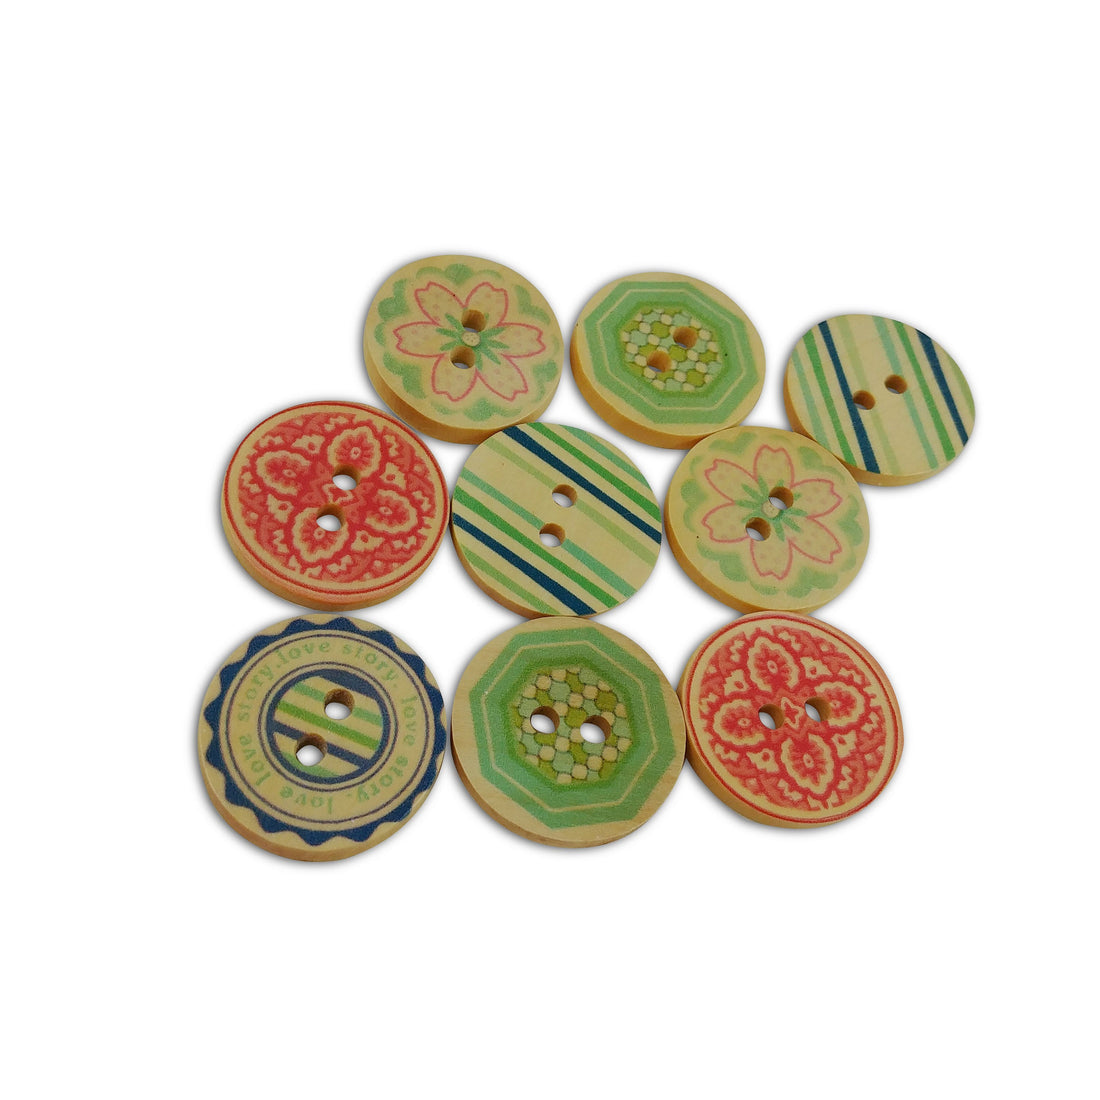 9 Mixed Patterns and Colors Buttons - Wood sewing buttons 25mm